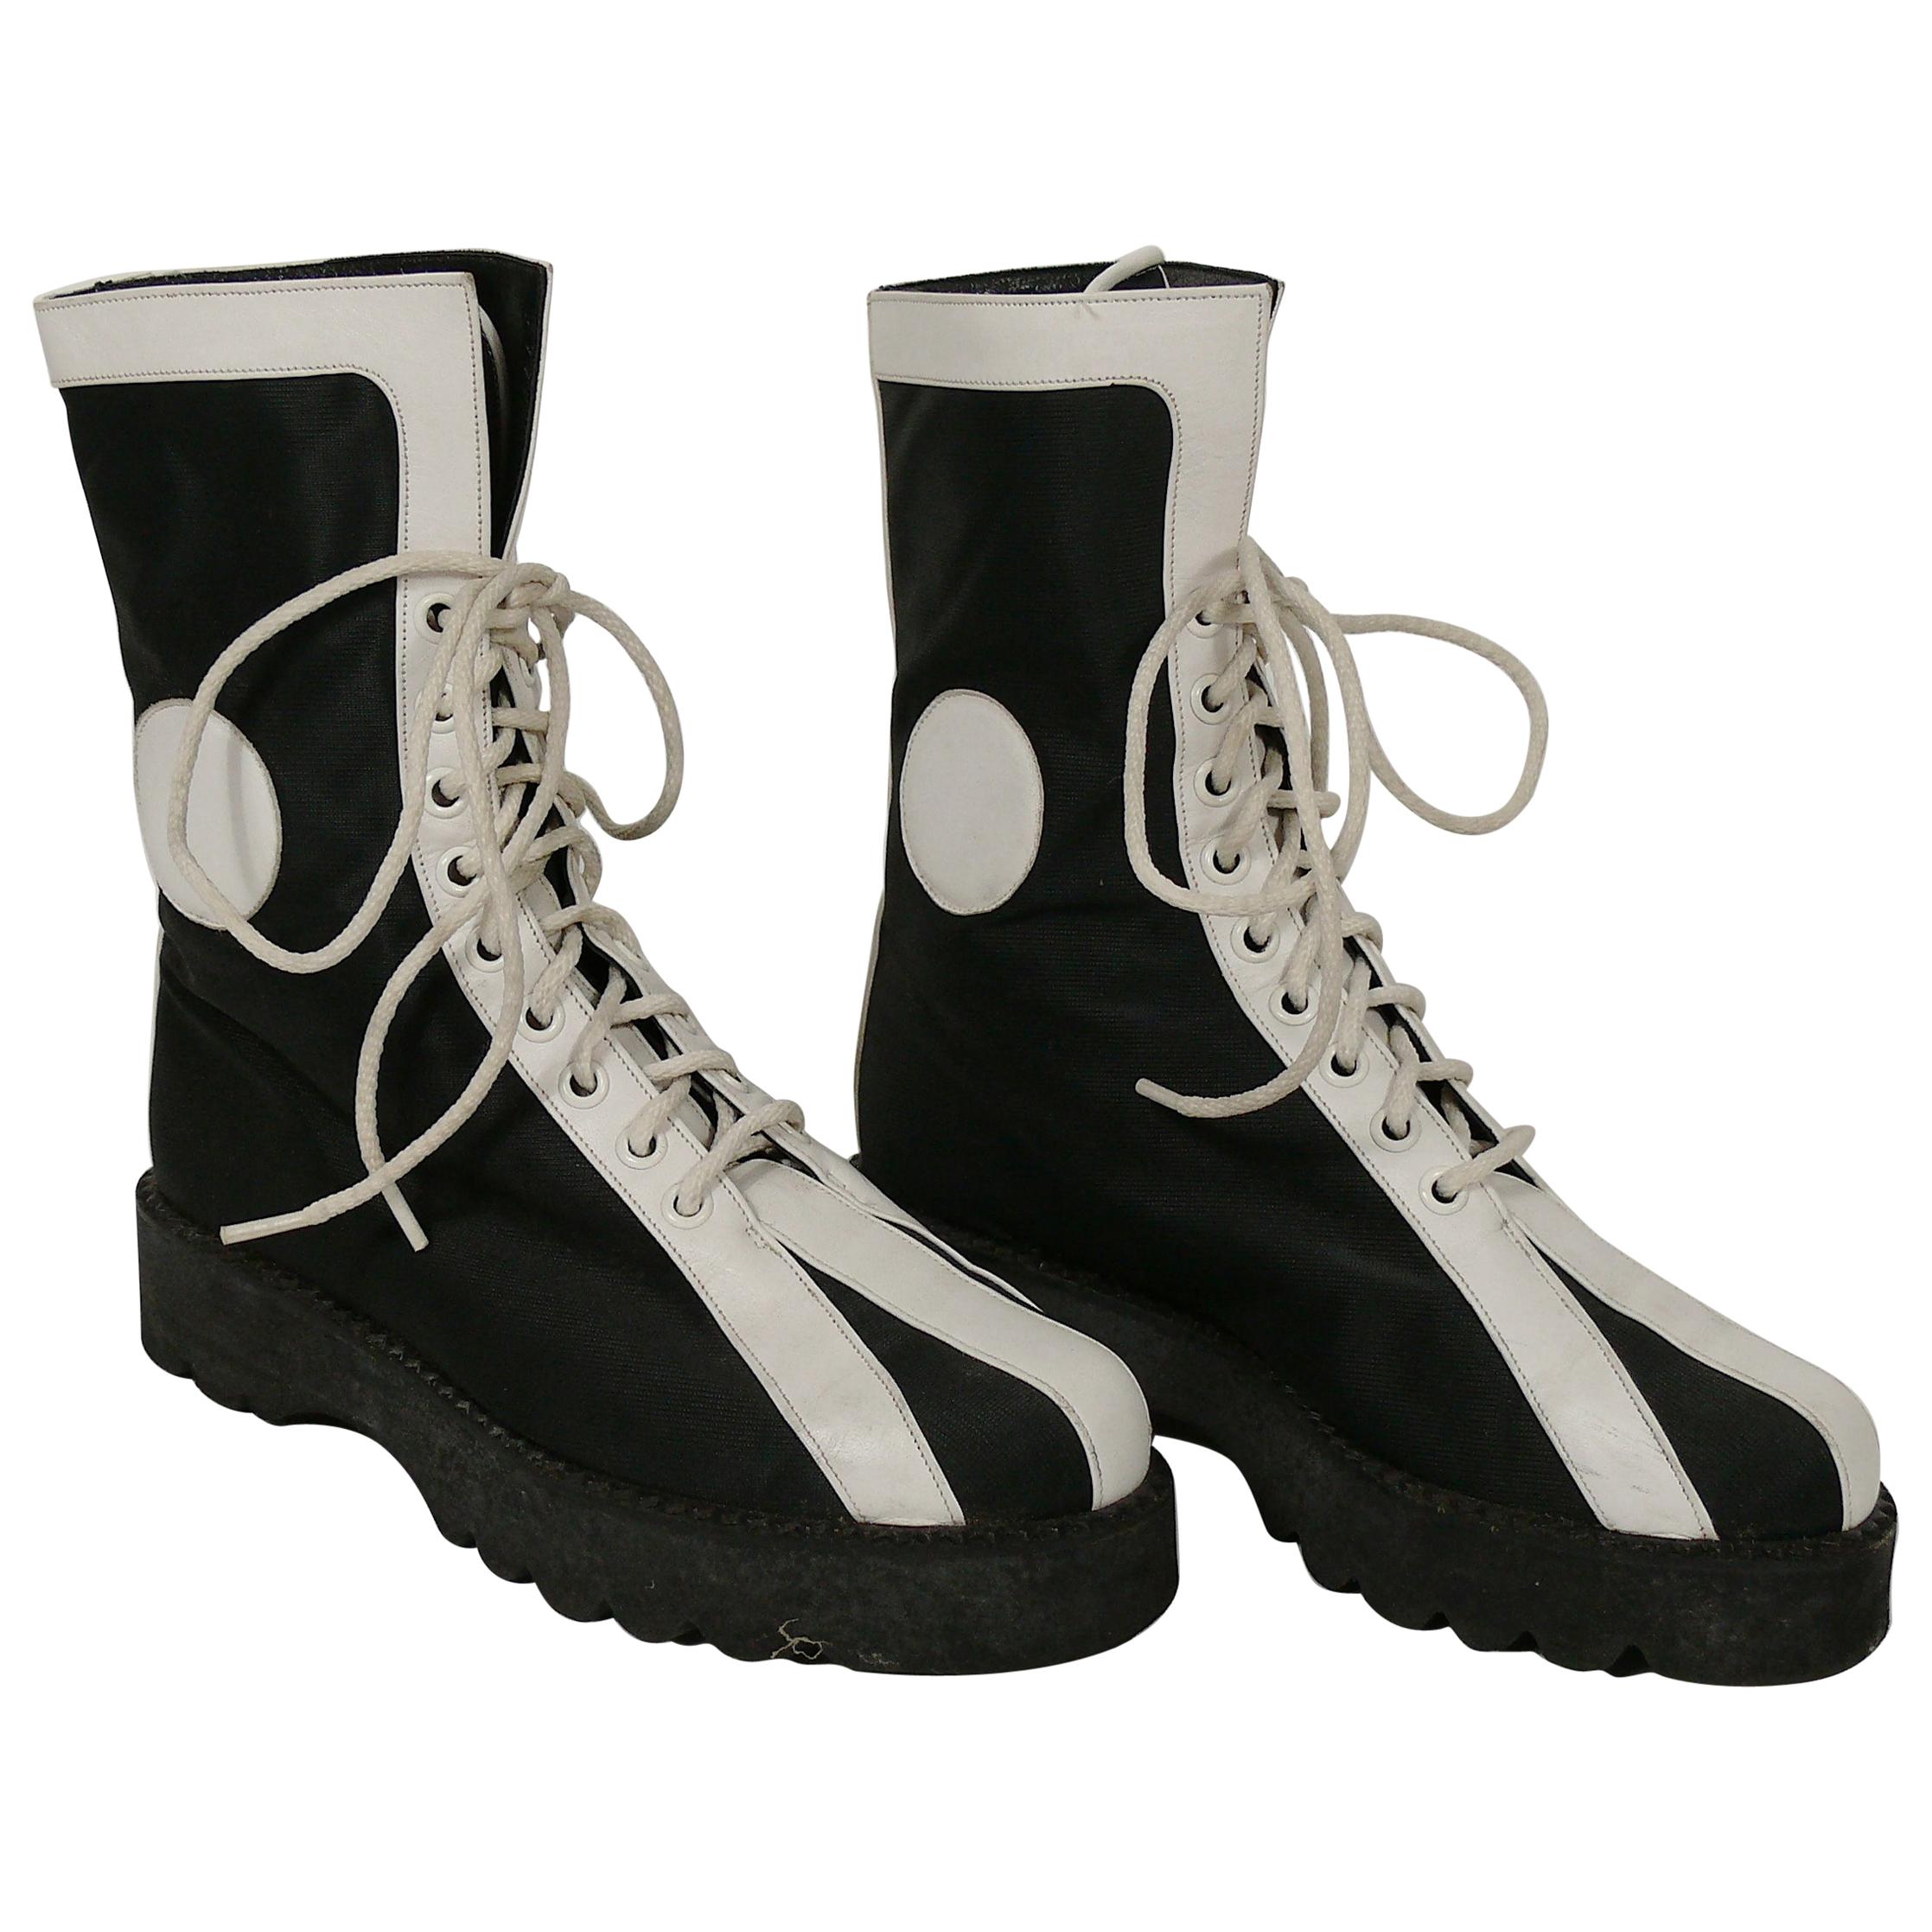 Karl Lagerfeld Vintage Black & White Lace Up Combat Boots